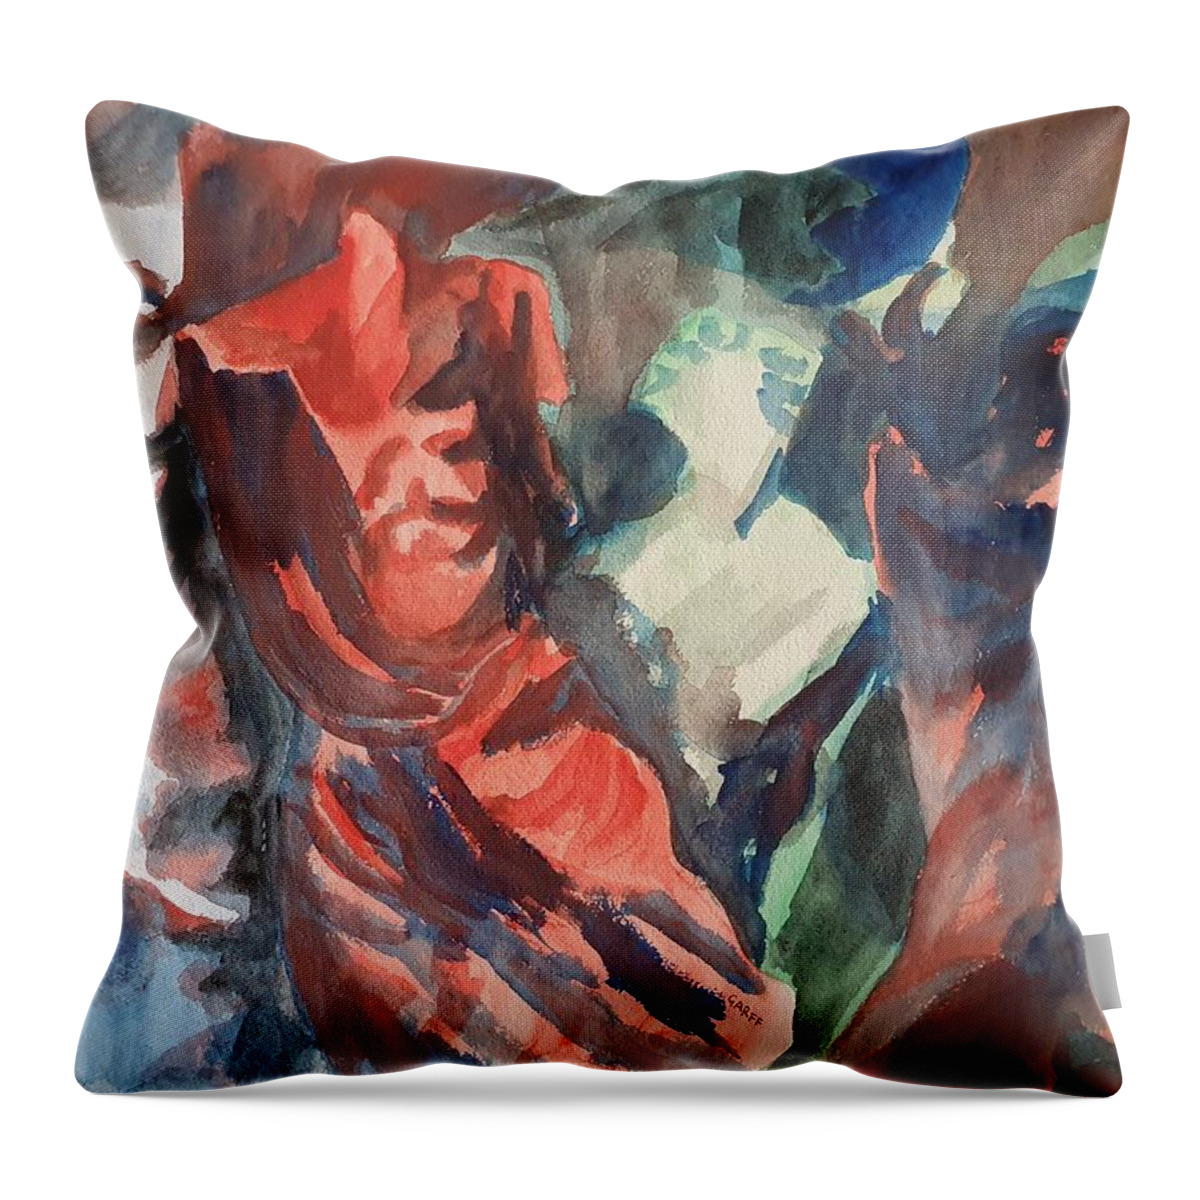 Sculpture Throw Pillow featuring the painting Archaic Greek Mystery by Enrico Garff